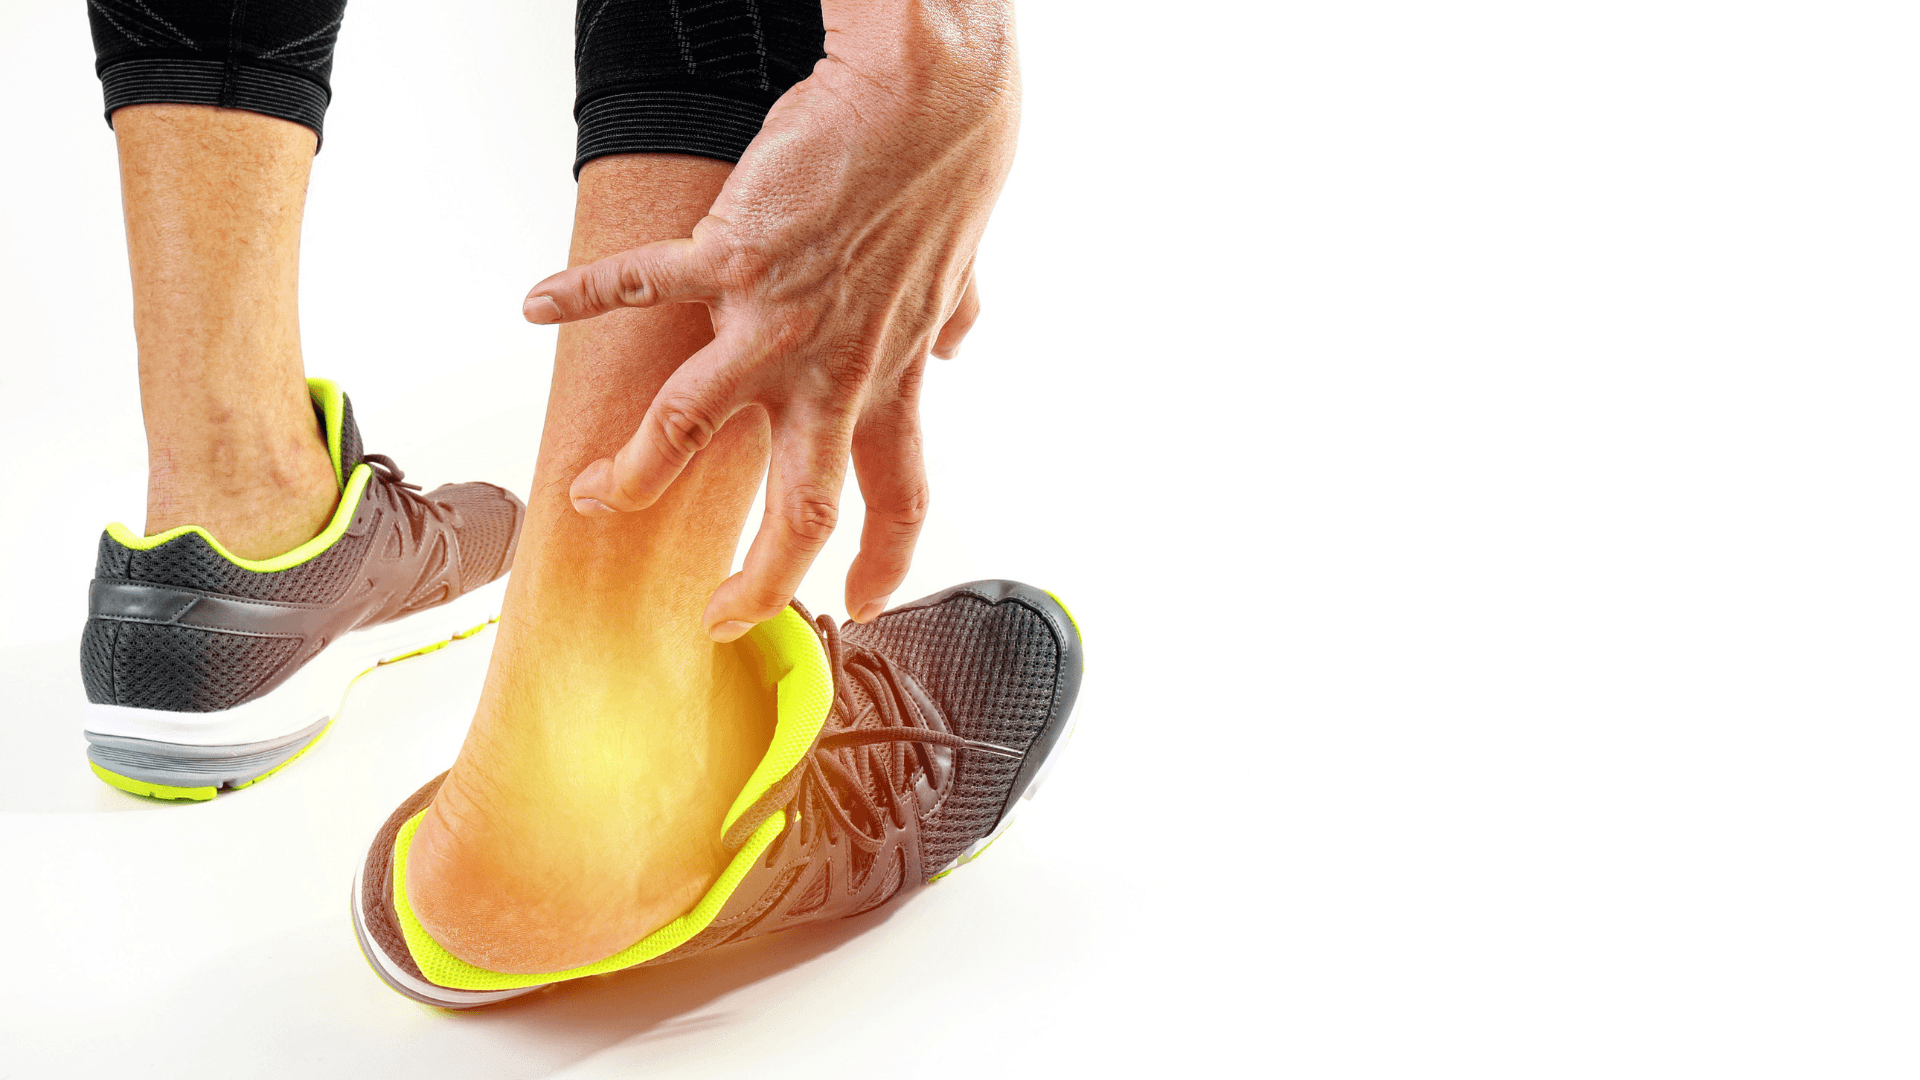 A Guide to Ankle Sprains